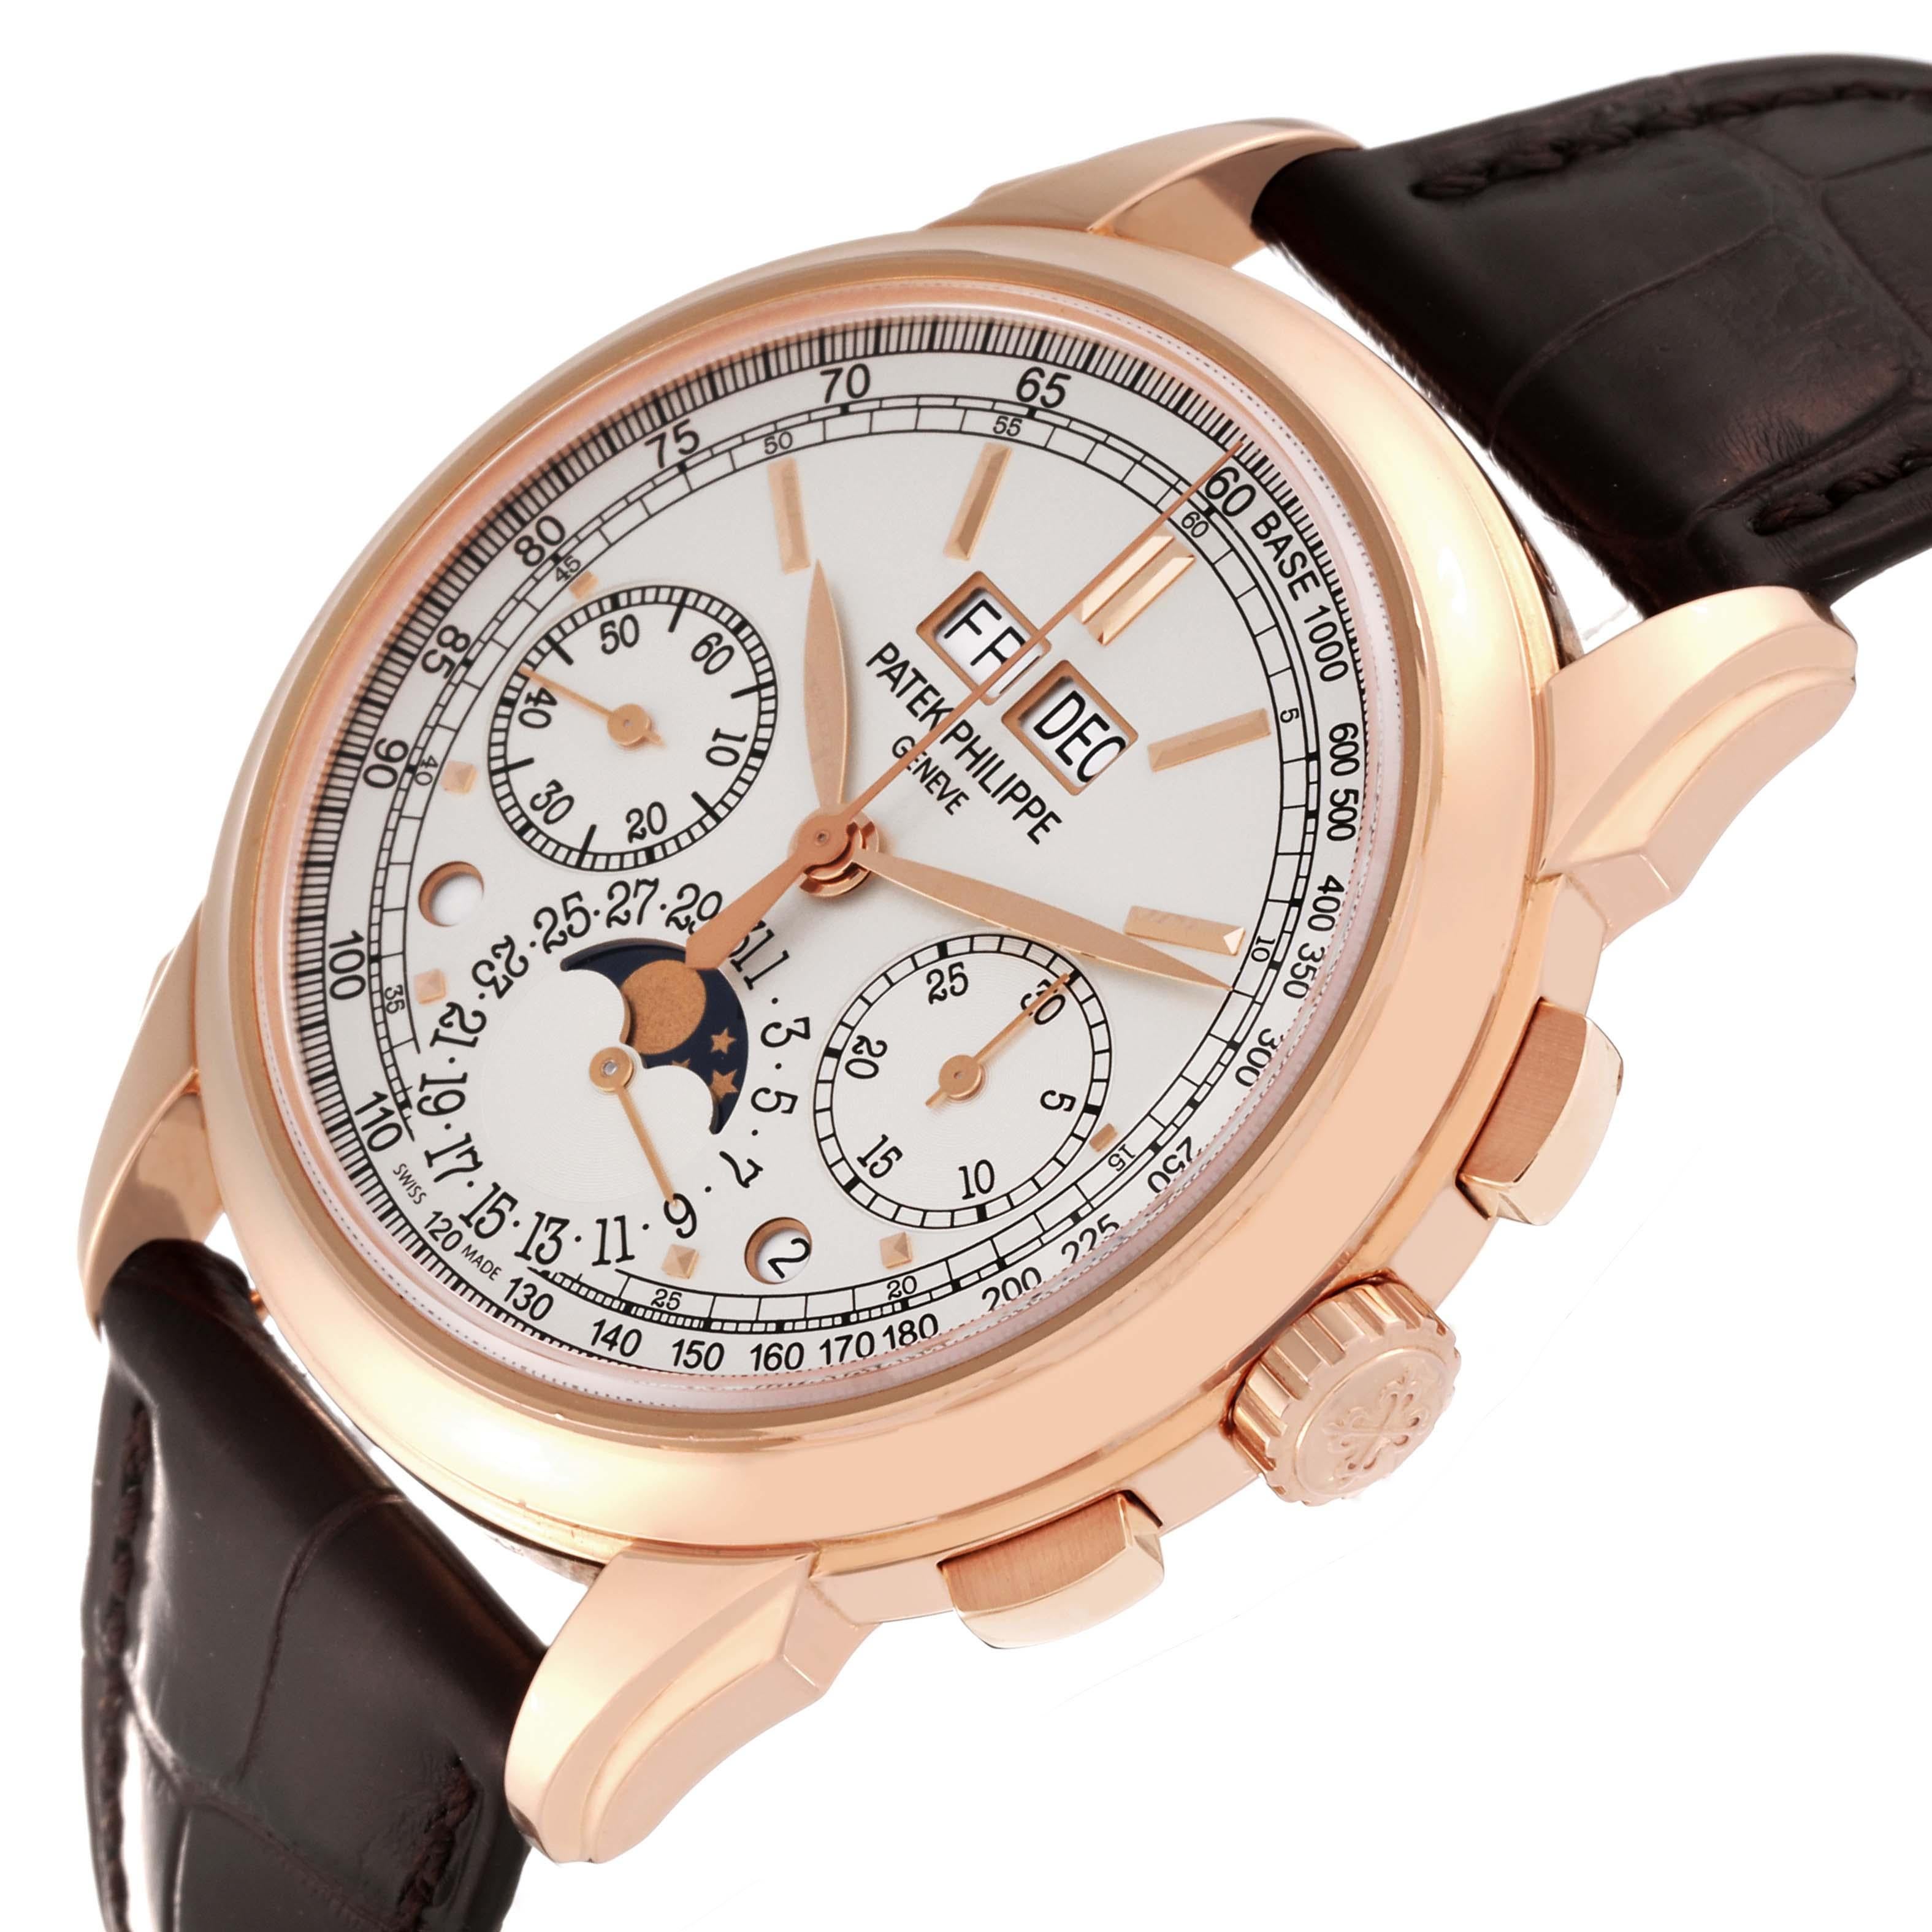 Patek Philippe Grand Complications Perpetual Calendar Rose Gold Watch 5270 In Excellent Condition For Sale In Atlanta, GA